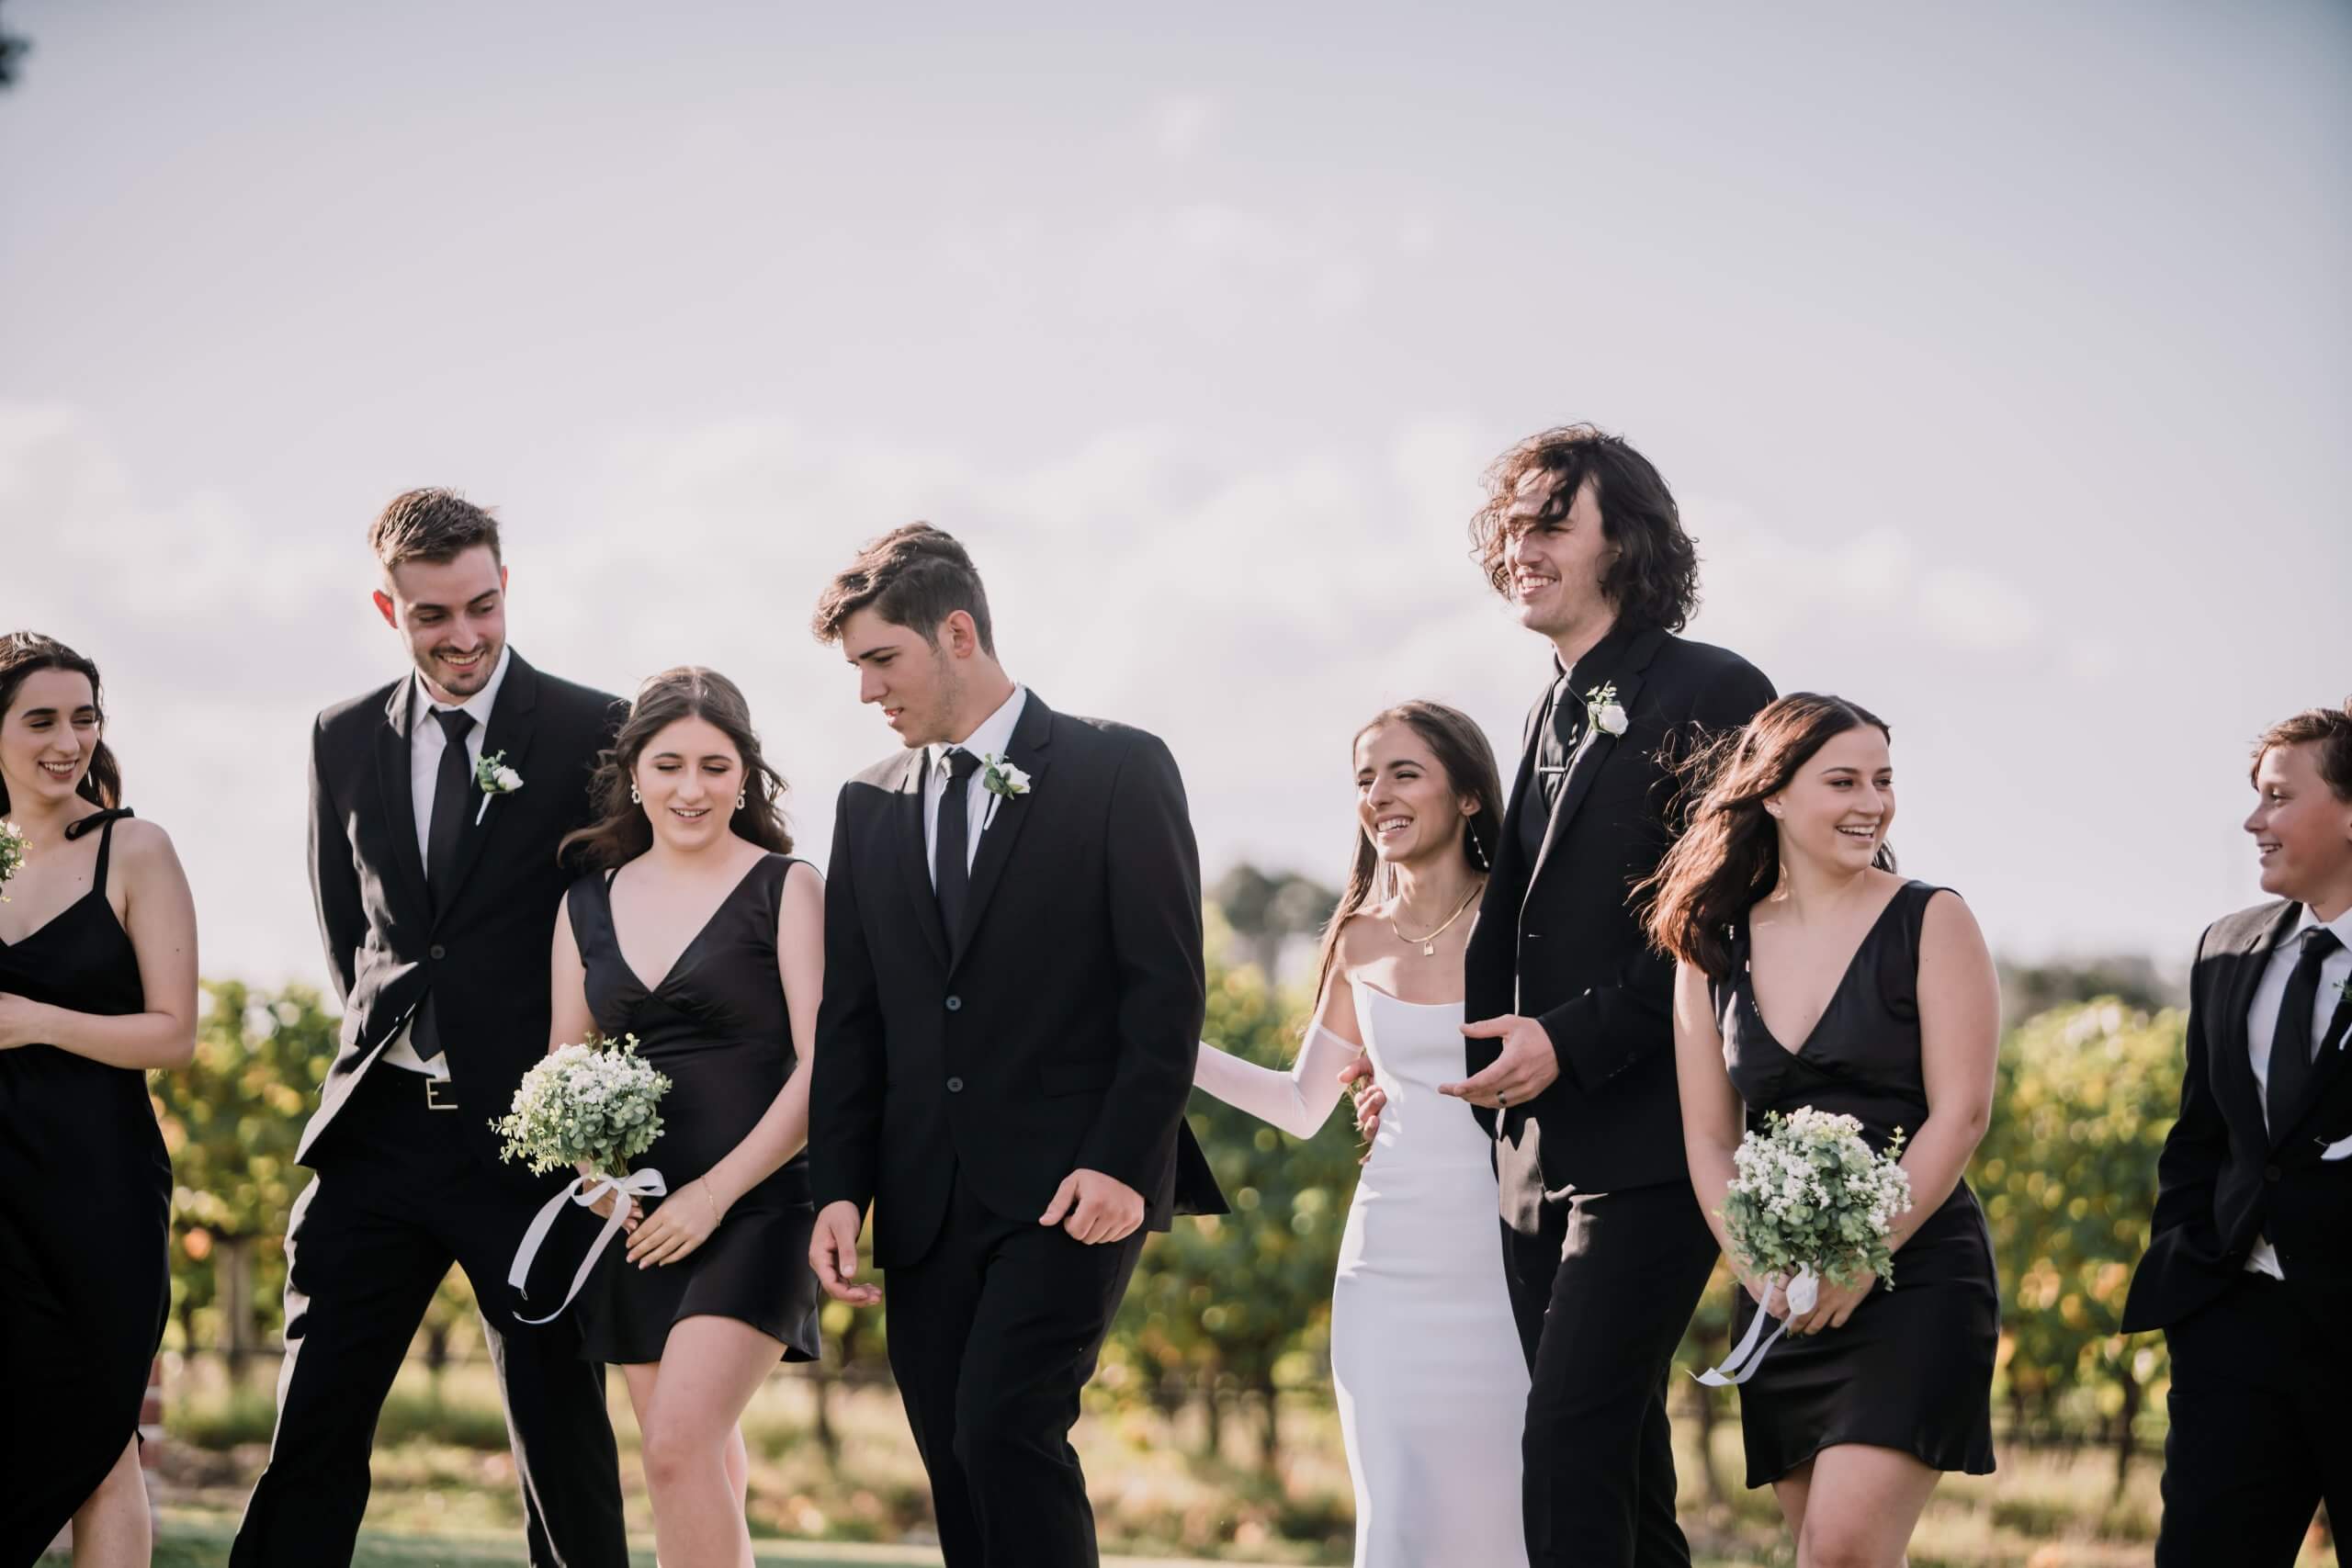 The bridal party, clad in black - with the exception of the bride - walks in the middle of a clearing.